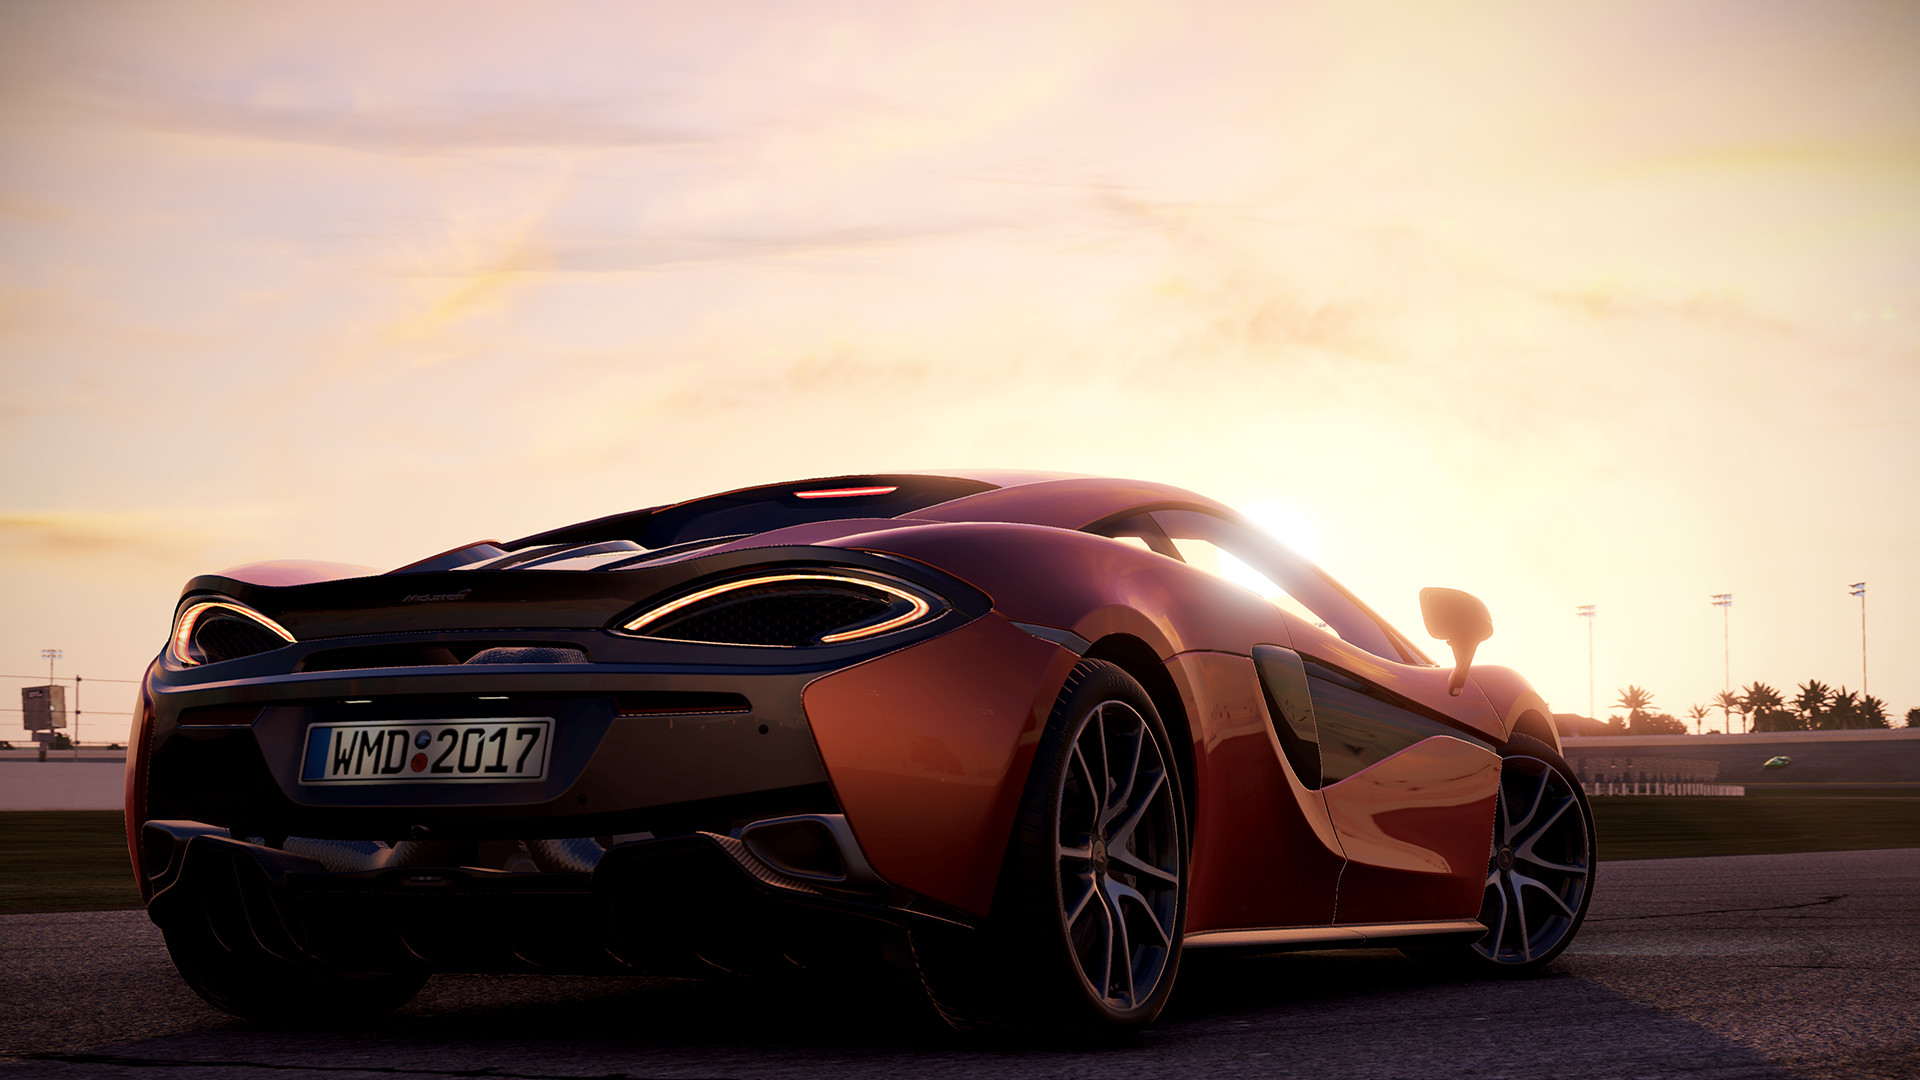 project cars pc updates